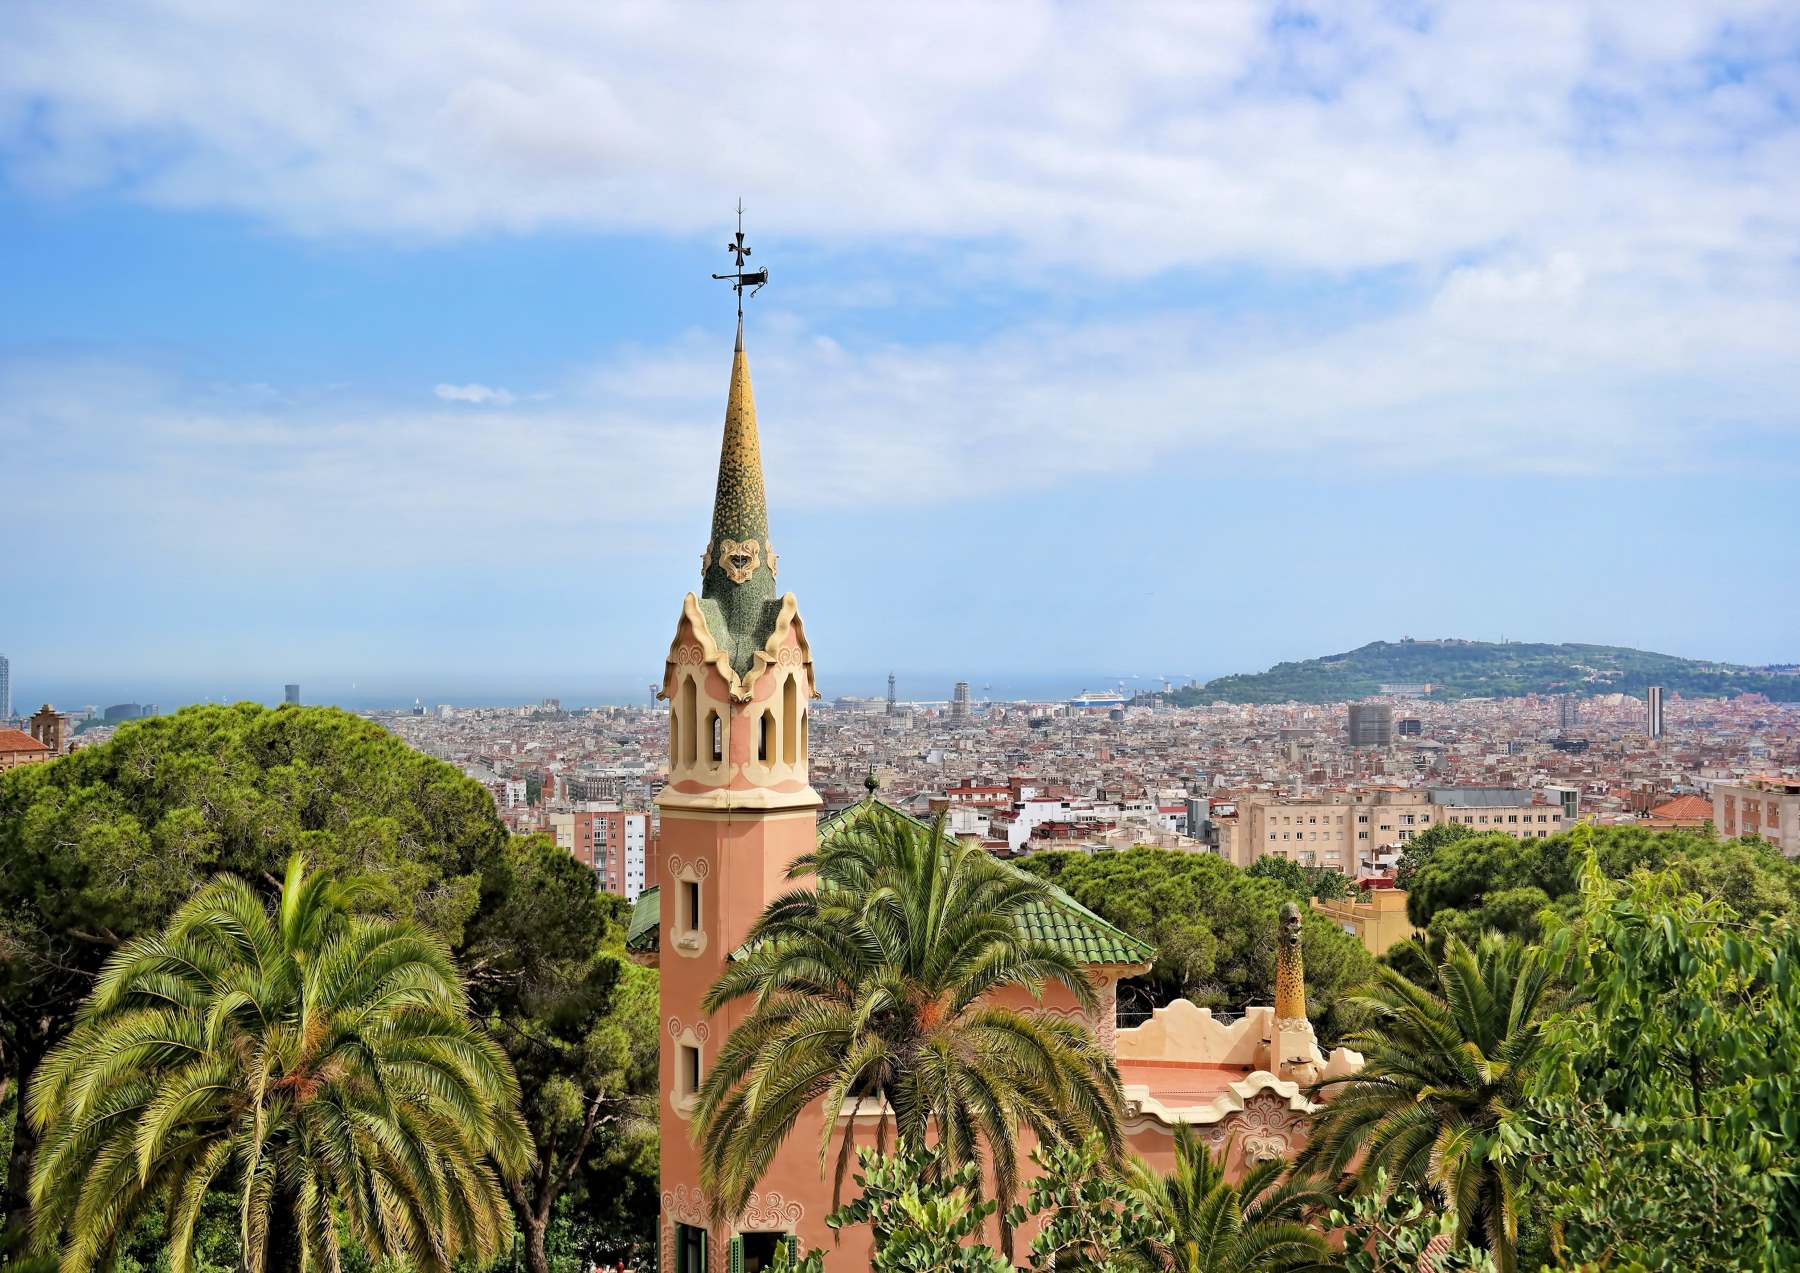 Top 10 Best Things to Do in Barcelona, Spain - Endless Travel Destinations